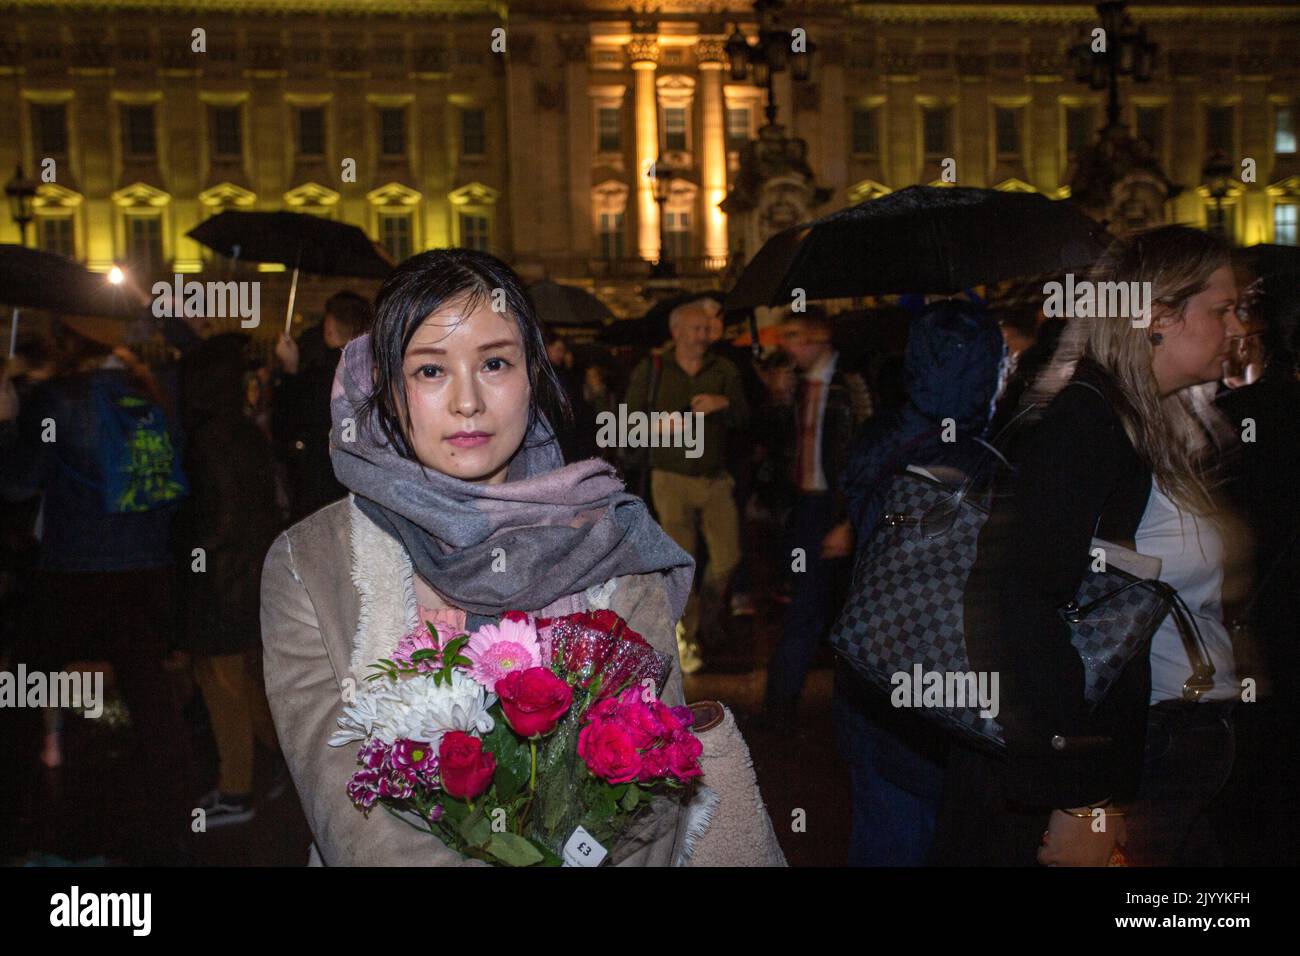 LONDON, ENGLAND - SEPTEMBER 08: Lin from China gather in front of Buckingham Palace to pay her respects following the death today of Queen Elizabeth ,Credit: Horst A. Friedrichs Alamy Live News Stock Photo